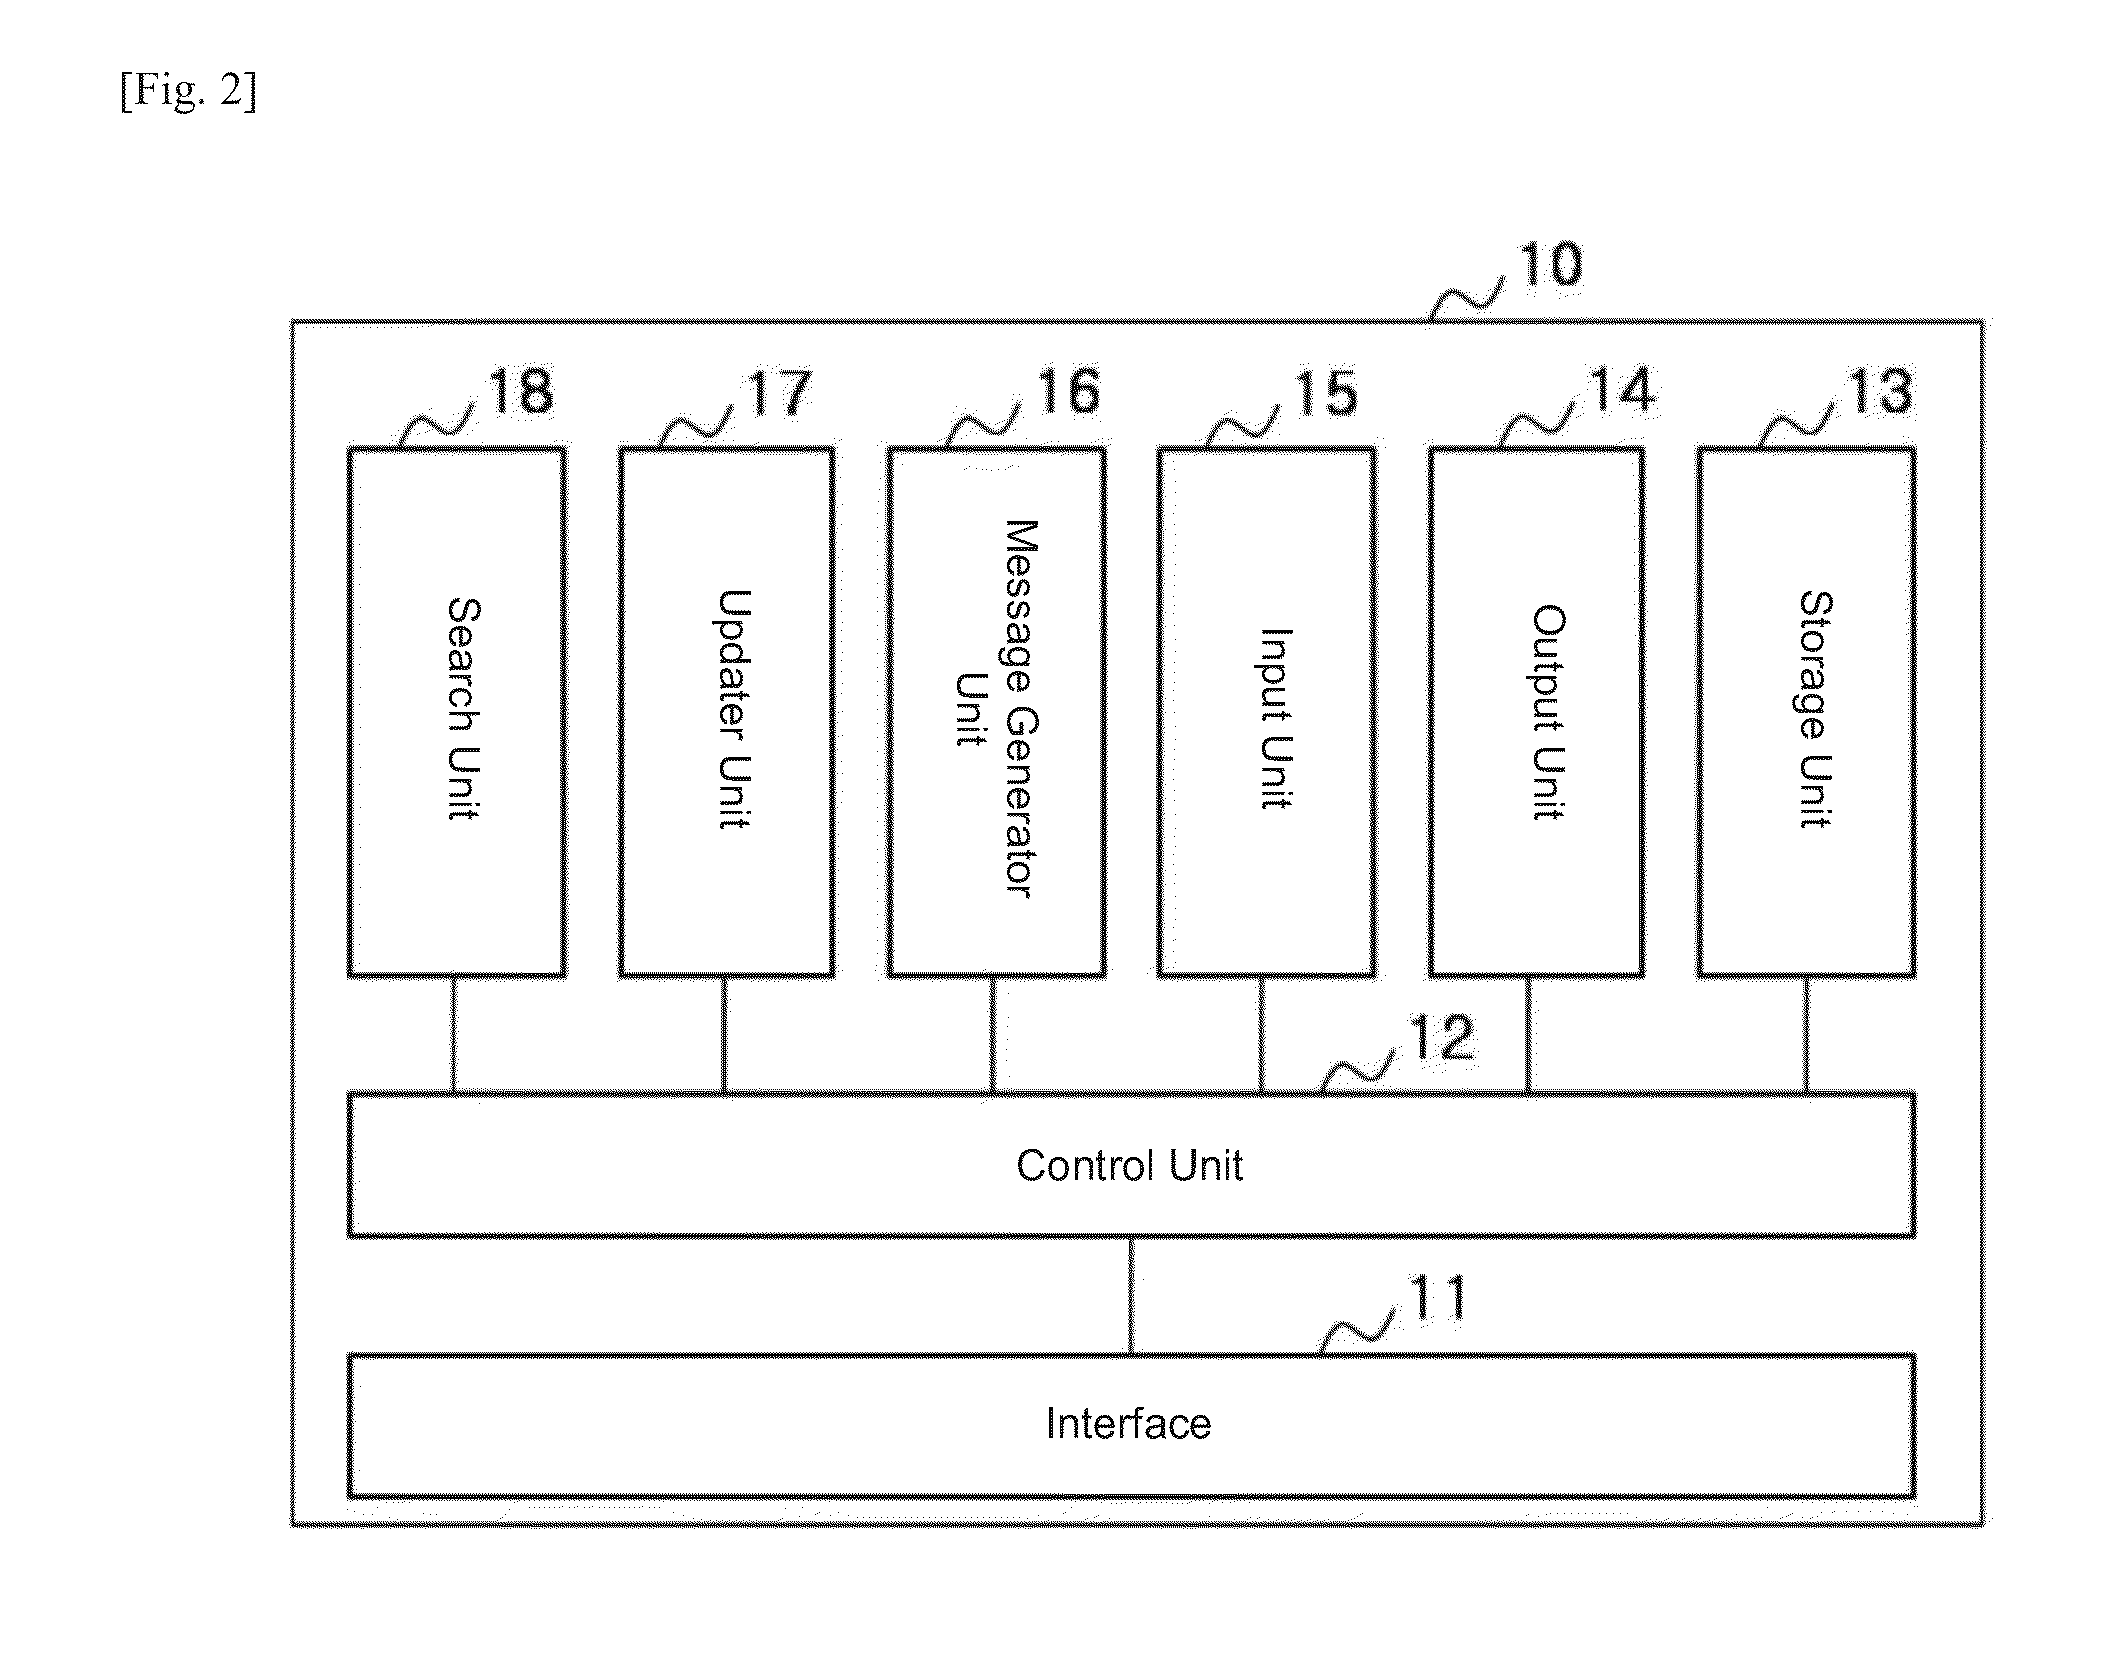 Cooperative medical consultation and diagnosis system and a method therefor